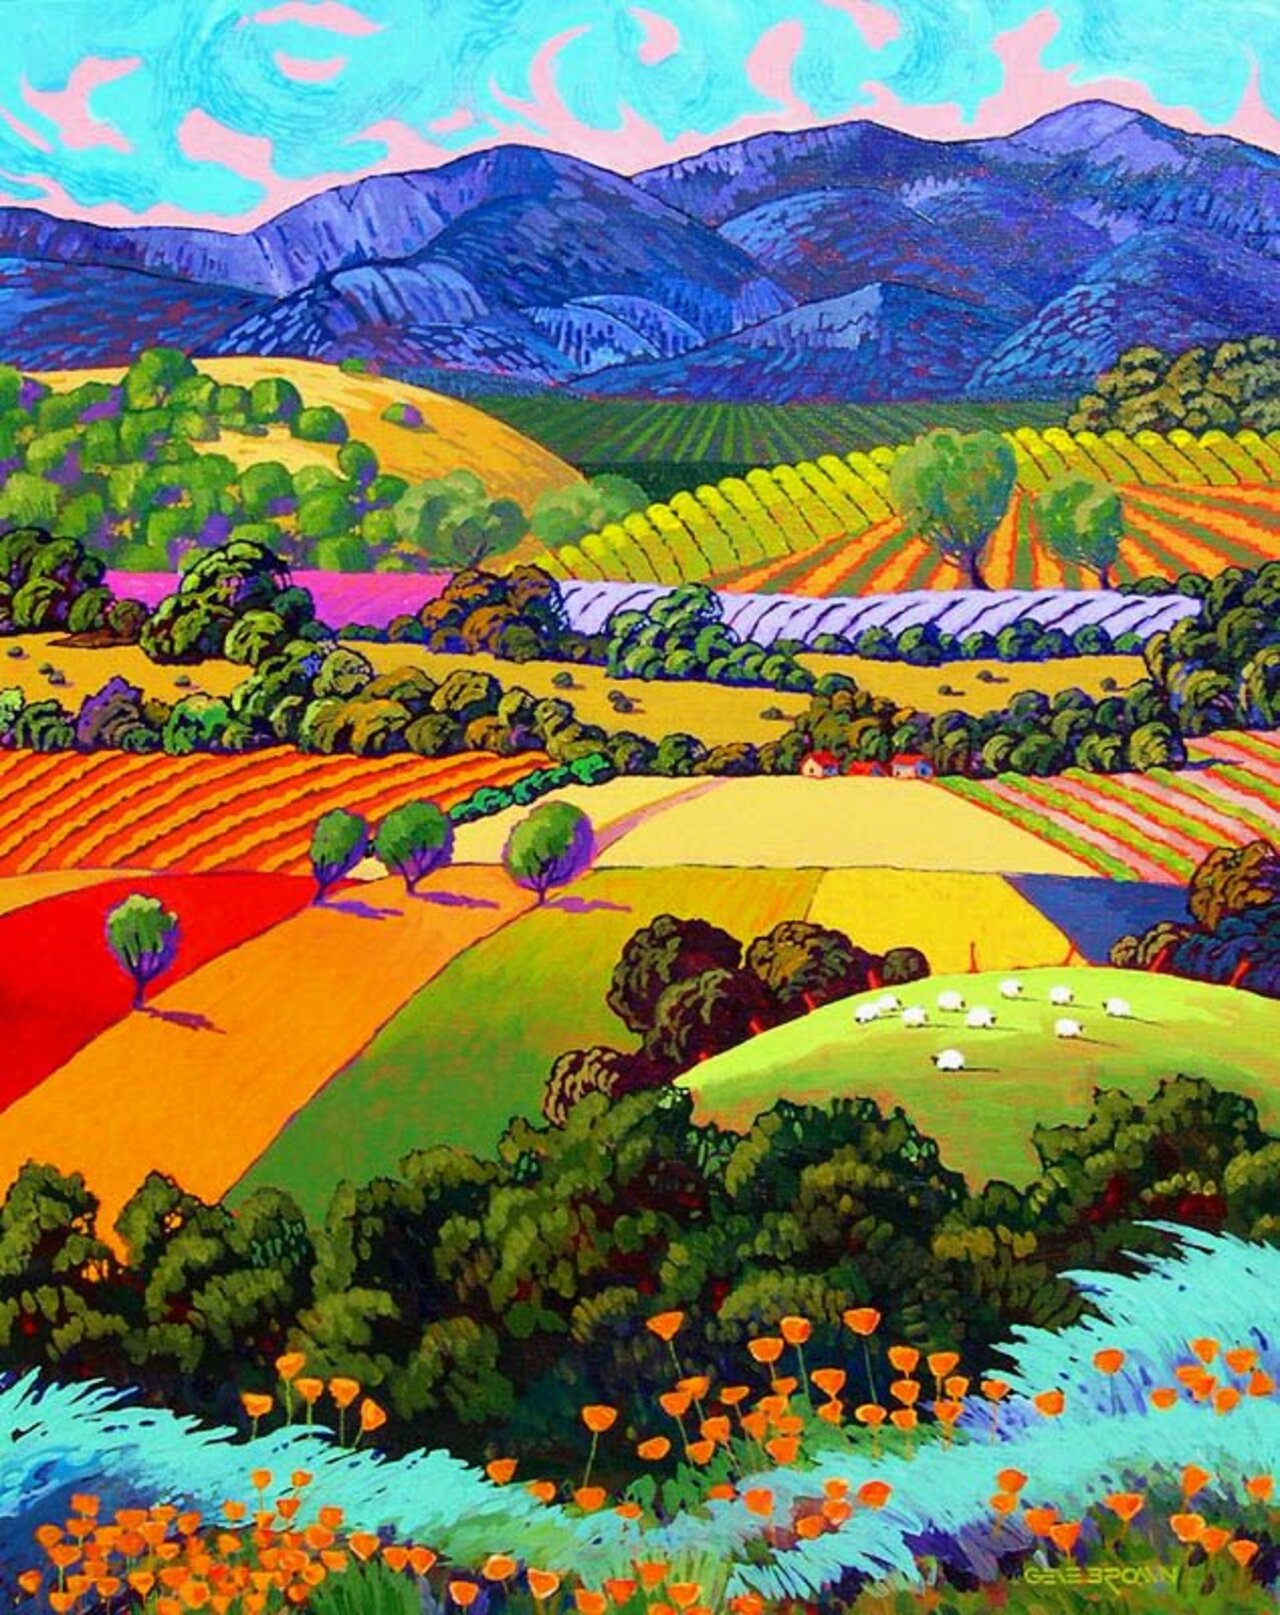 By Gene Brown#Painting #art #ArtLovers https://t.co/e4pHZM95hb